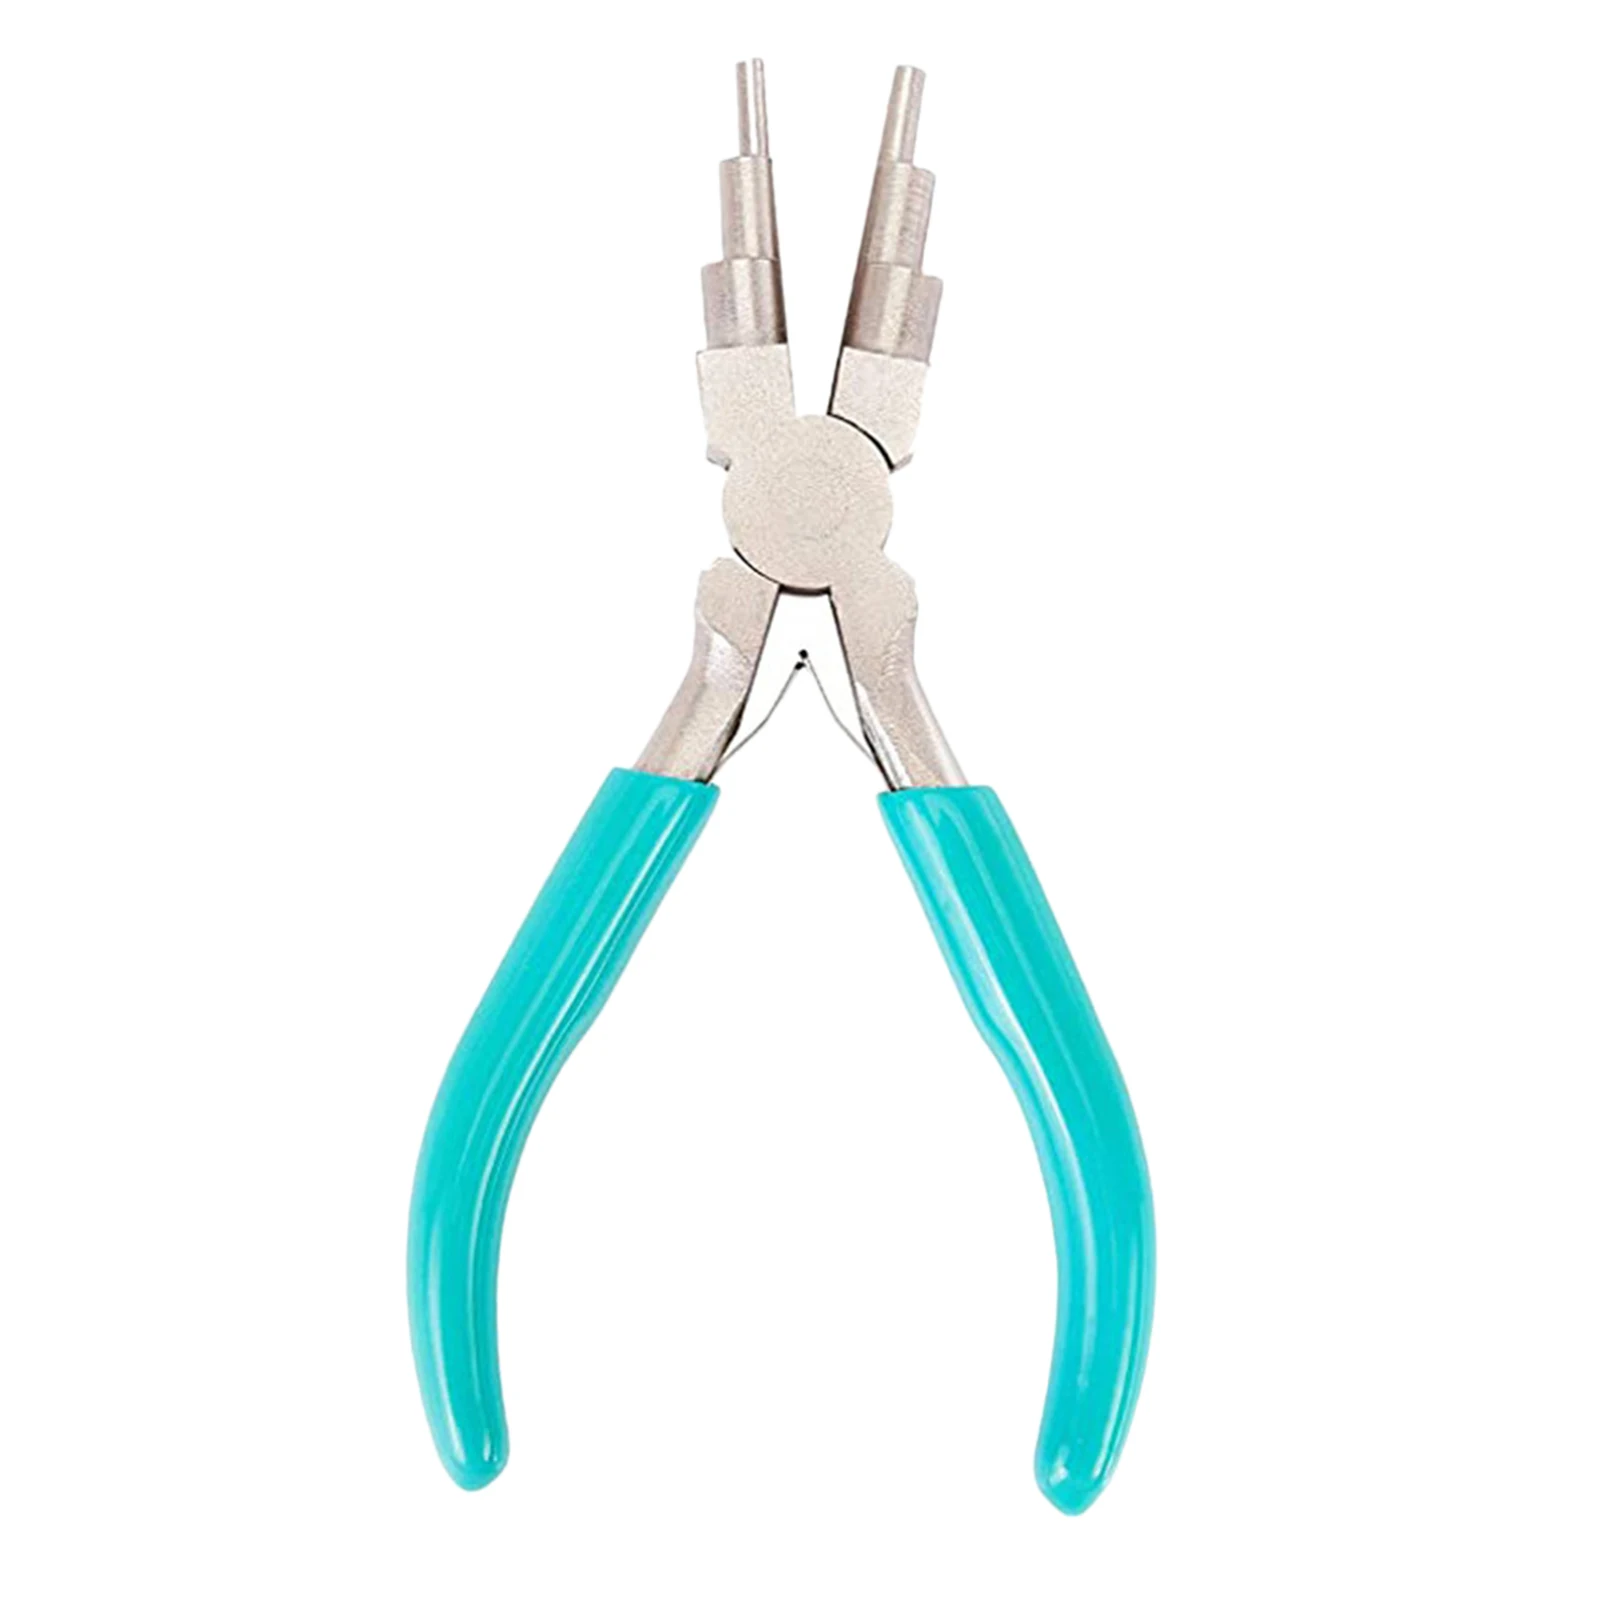 6-in-1 Bail Making Pliers Carbon Steel 6-Step Multi-Size Wire Looping Forming Pliers Making 3mm/4mm/6mm/7mm/8.5mm/9.5mm Loops